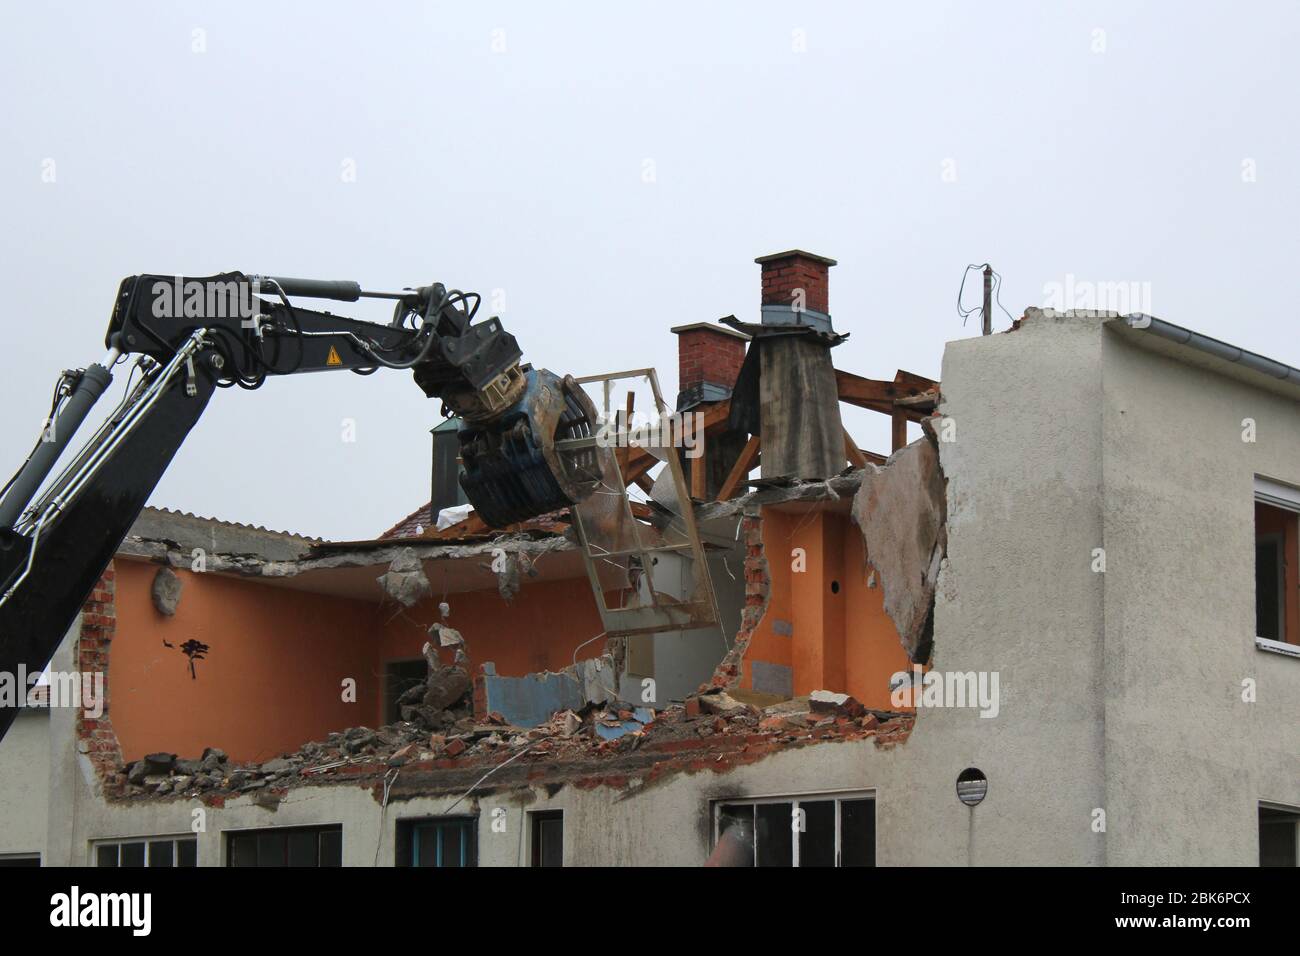 Demolition of an old house Stock Photo